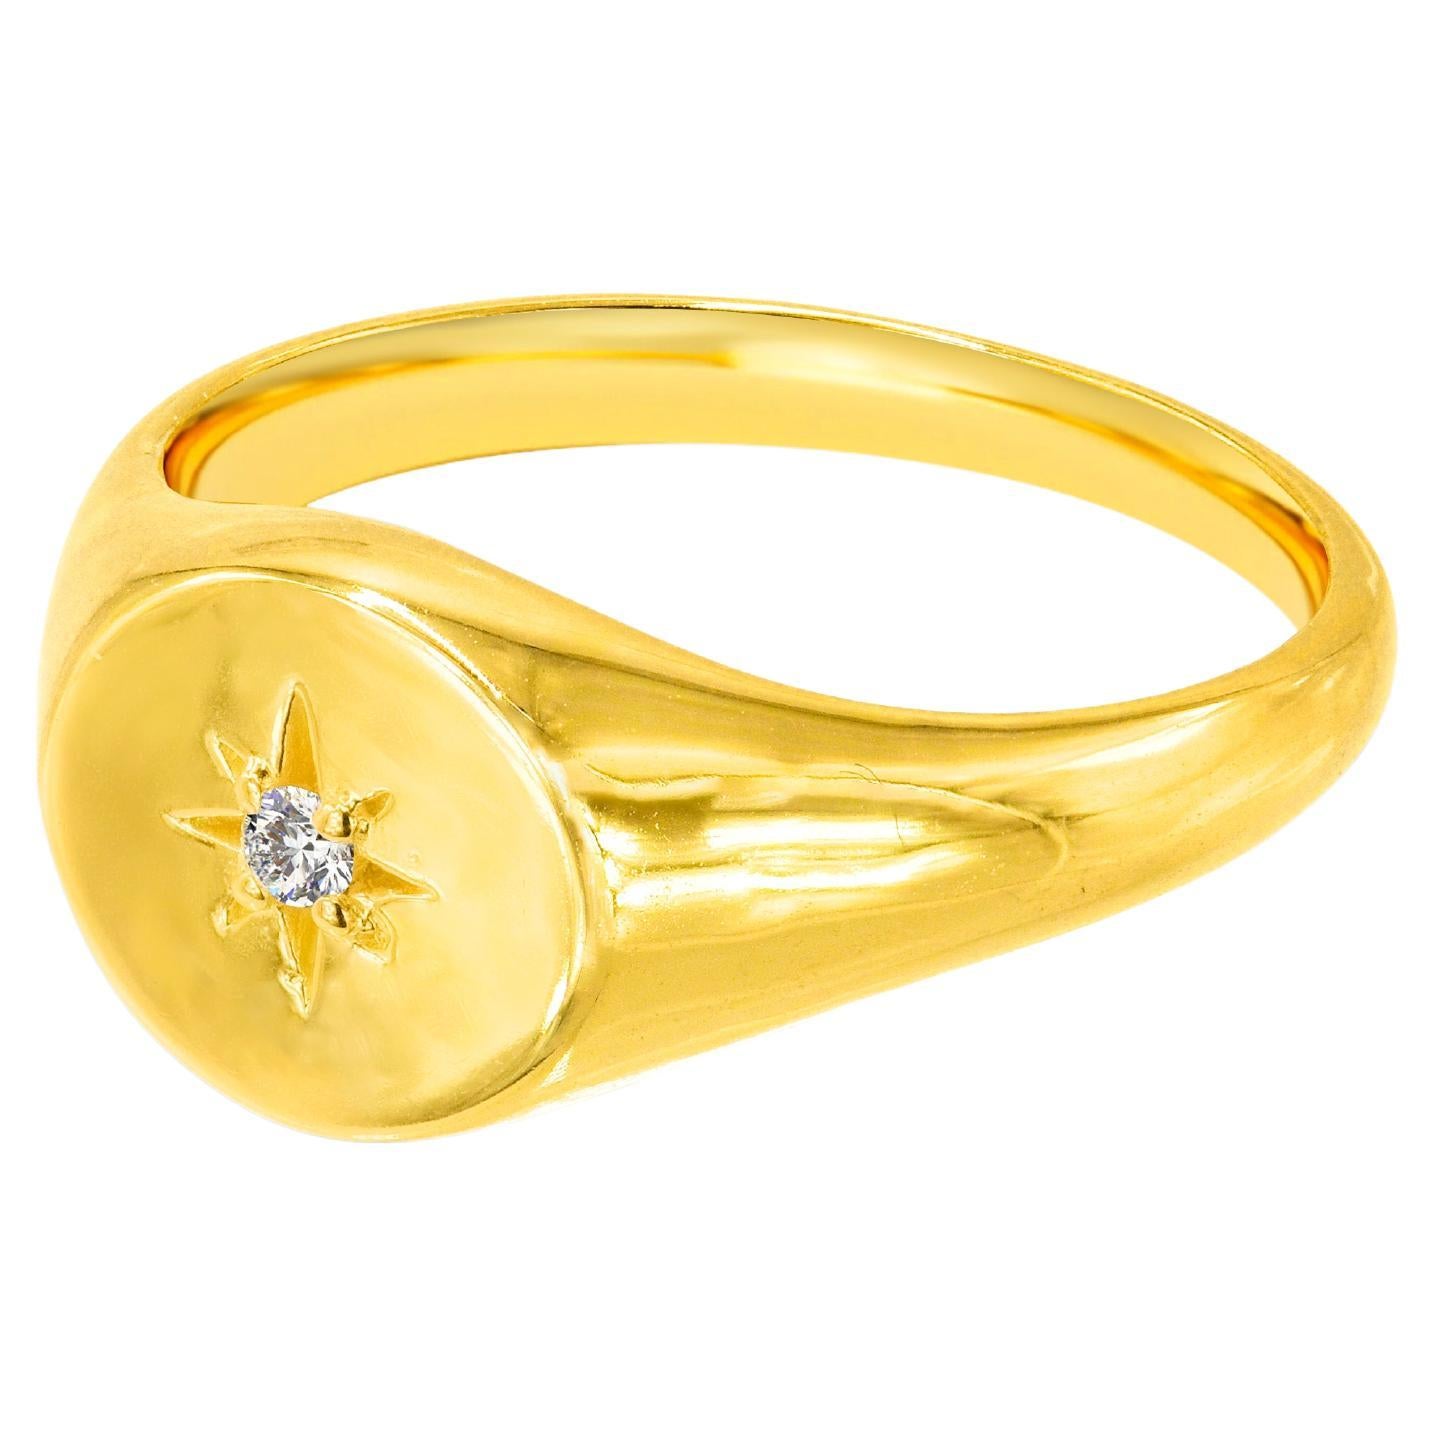 For Sale:  18K Genuine Gold Filled Ring with 0.03 Carat Natural Brilliant Diamond